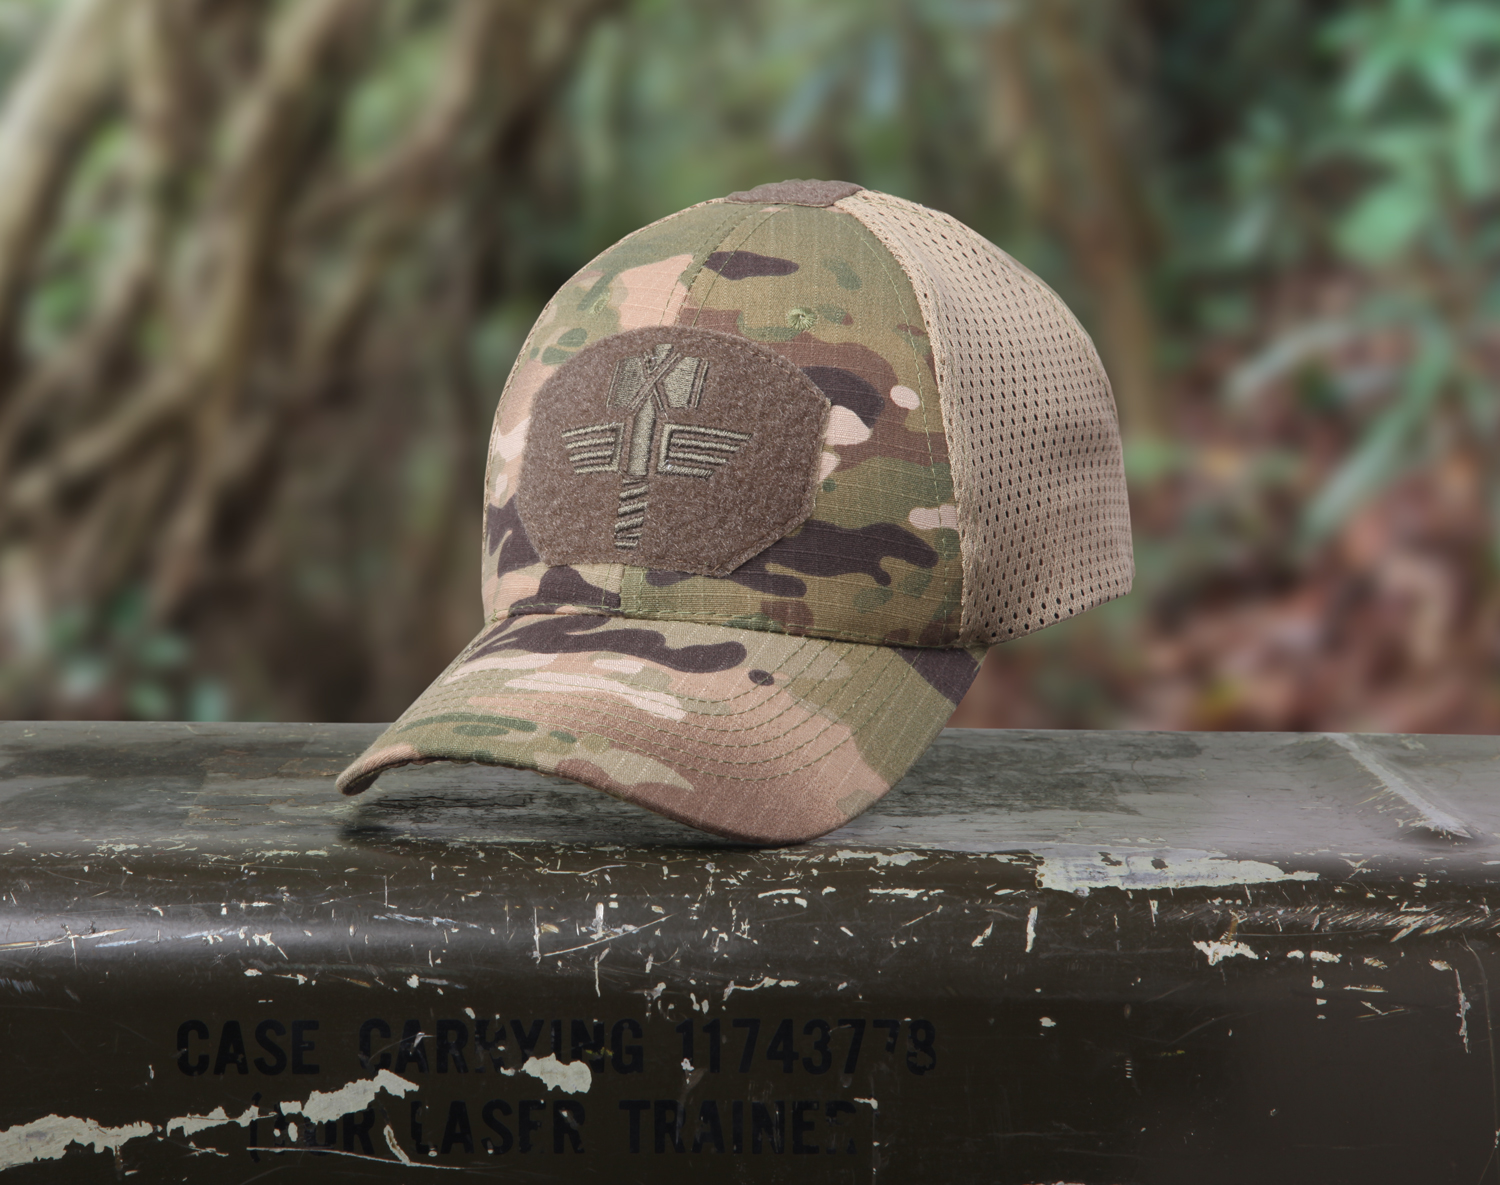 Chieftain CP Camouflage Baseball Netcap Magic Tactical Cap Outdoor Hunting Camouflage Hiking Sunscreen